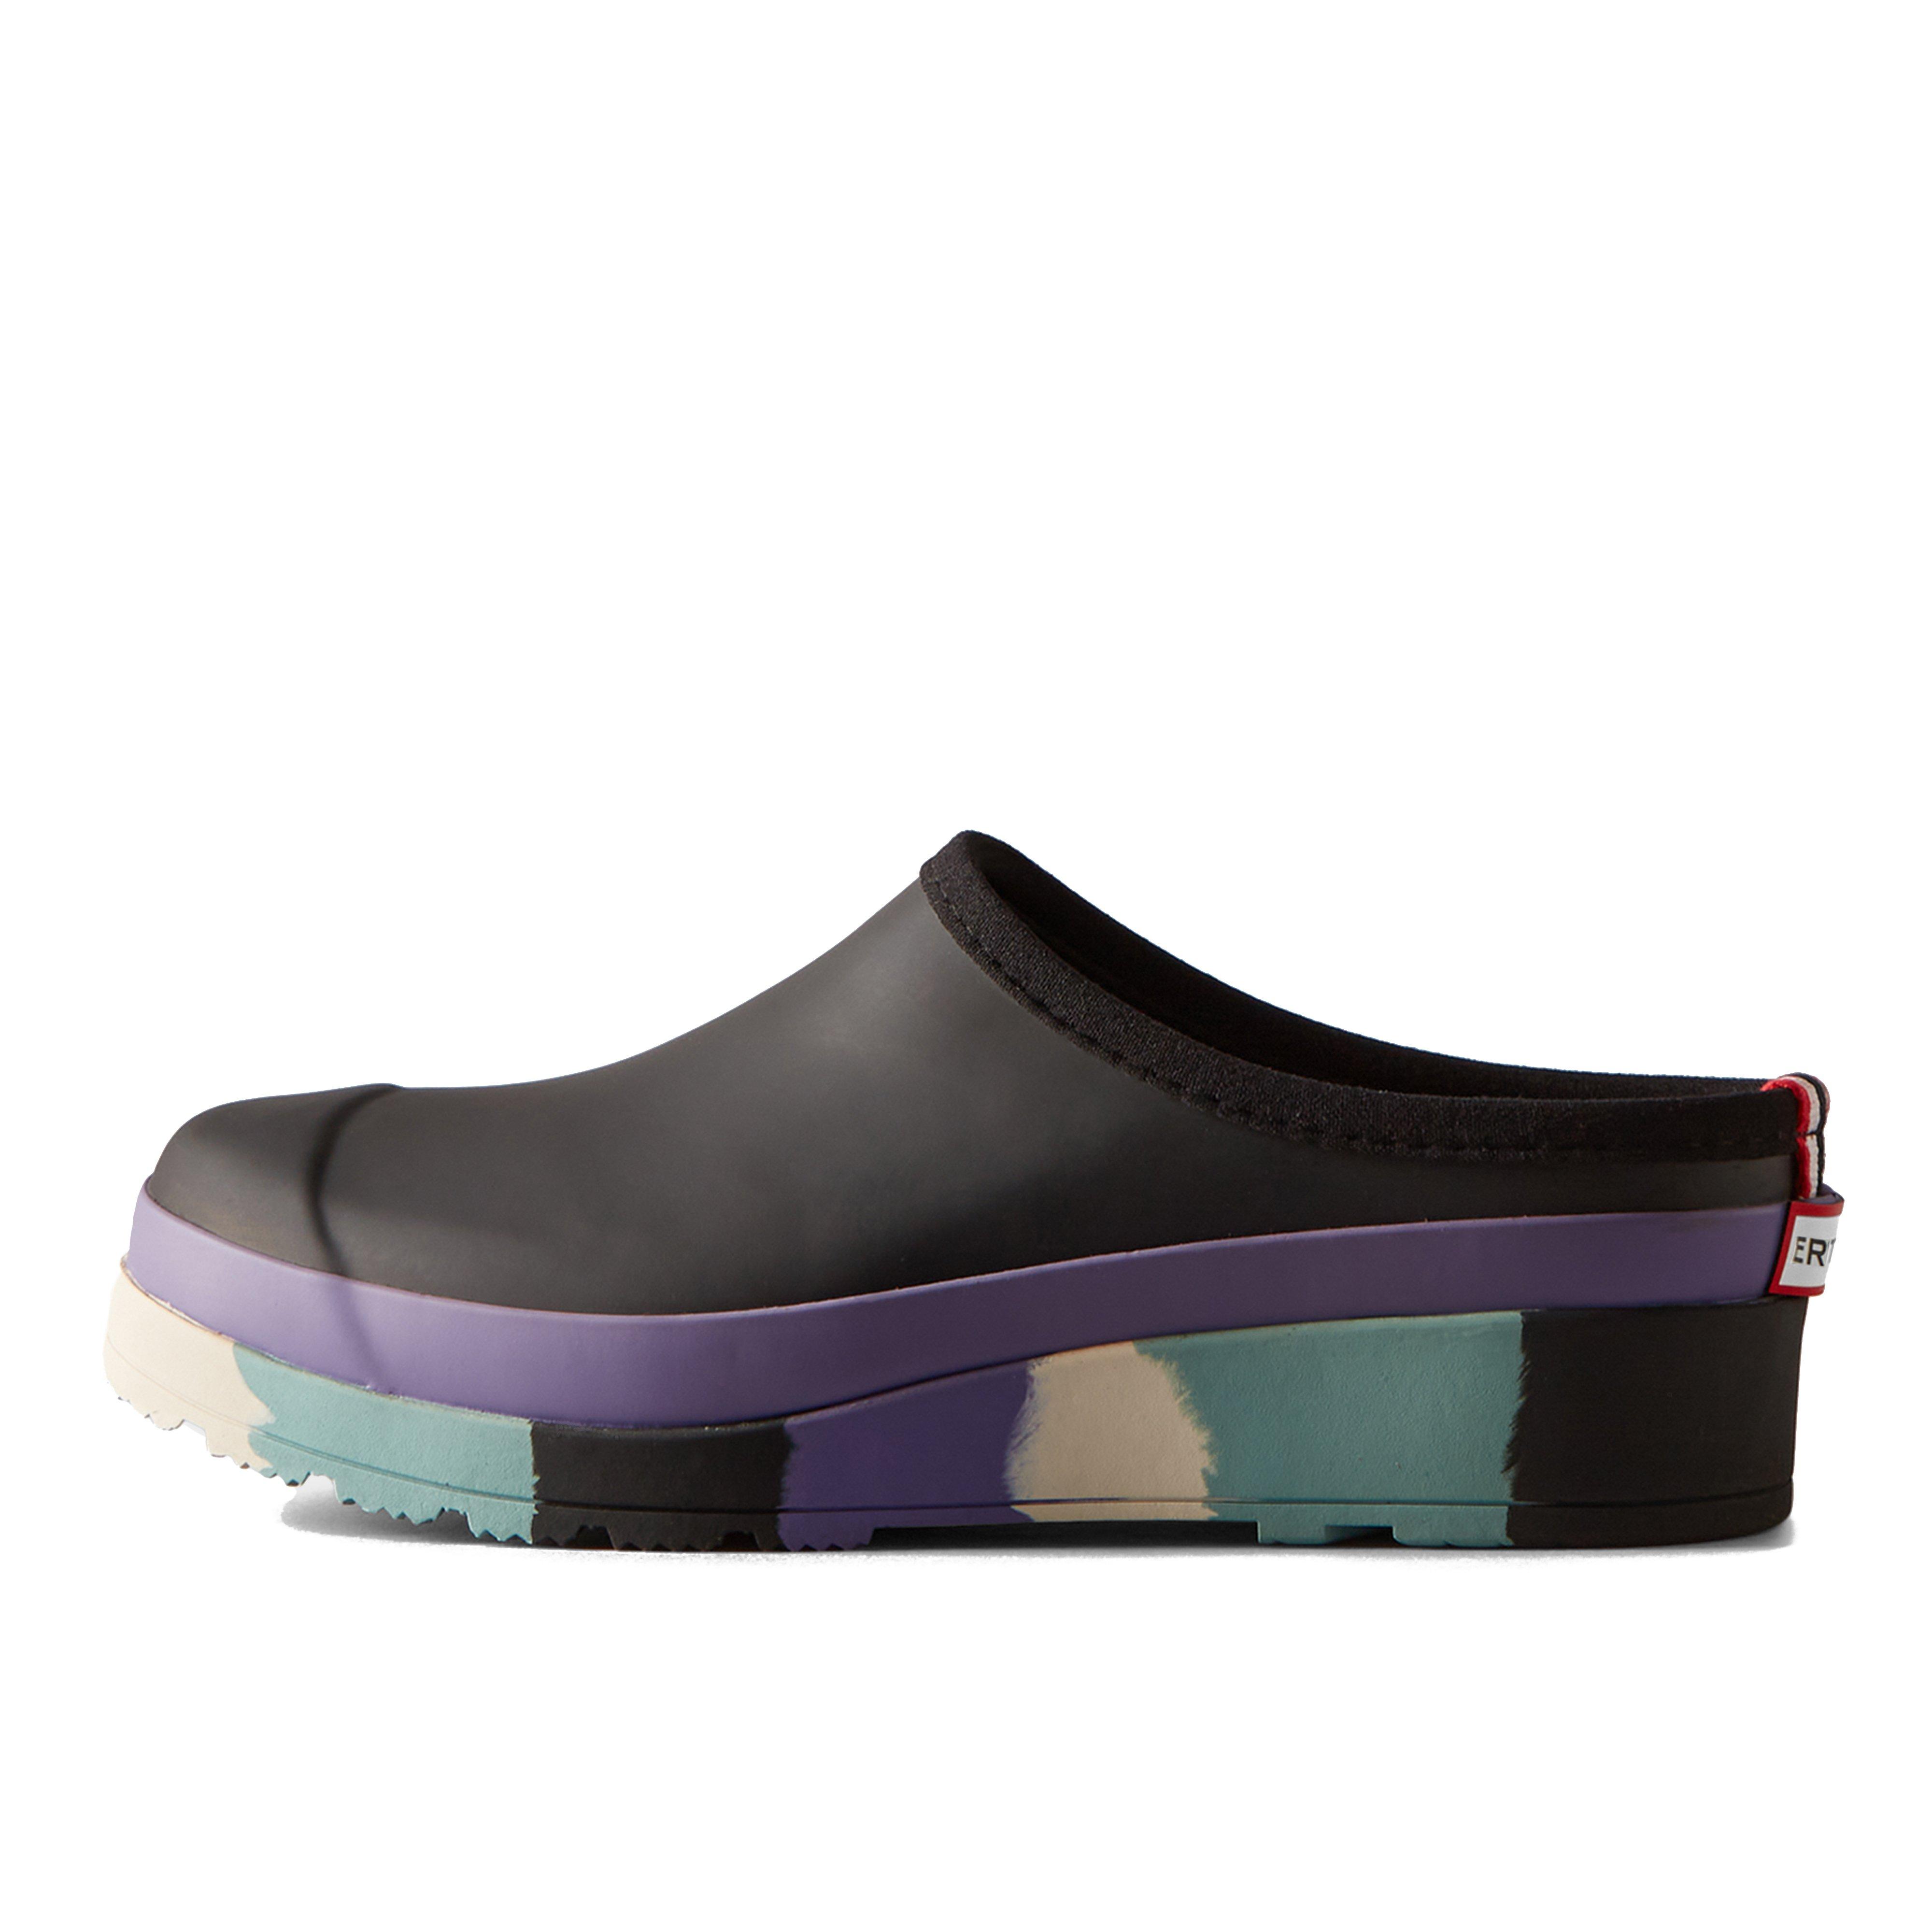 Womens Play Striped Sole Clogs Willow Black/Tempered Mauve/Birdseye Blue/Skimmed Stone